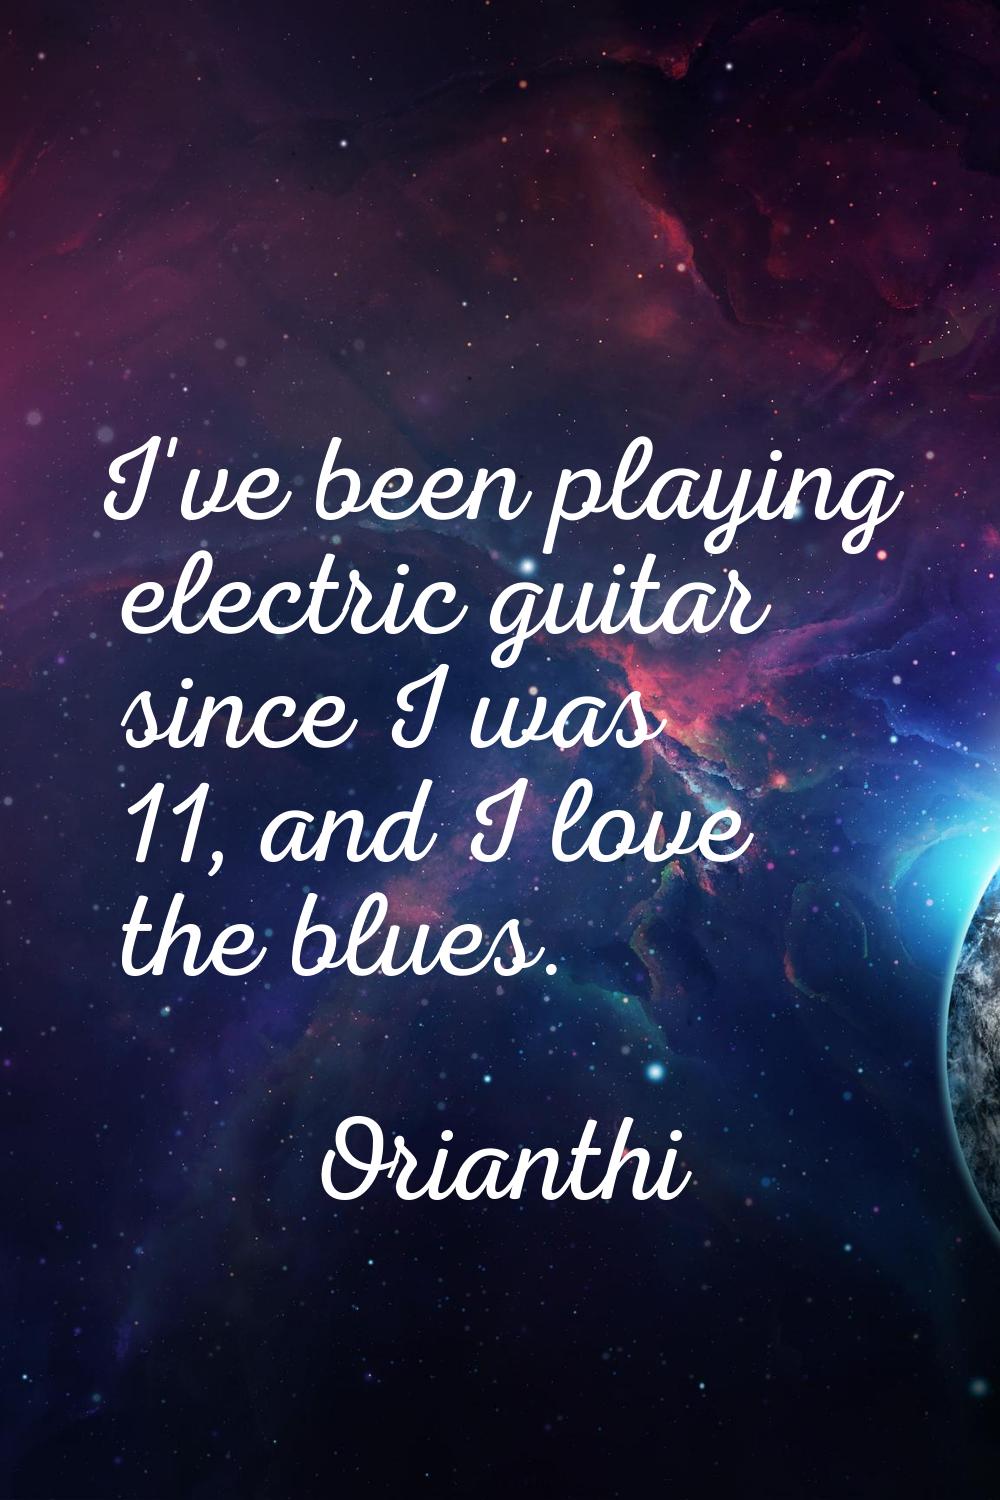 I've been playing electric guitar since I was 11, and I love the blues.